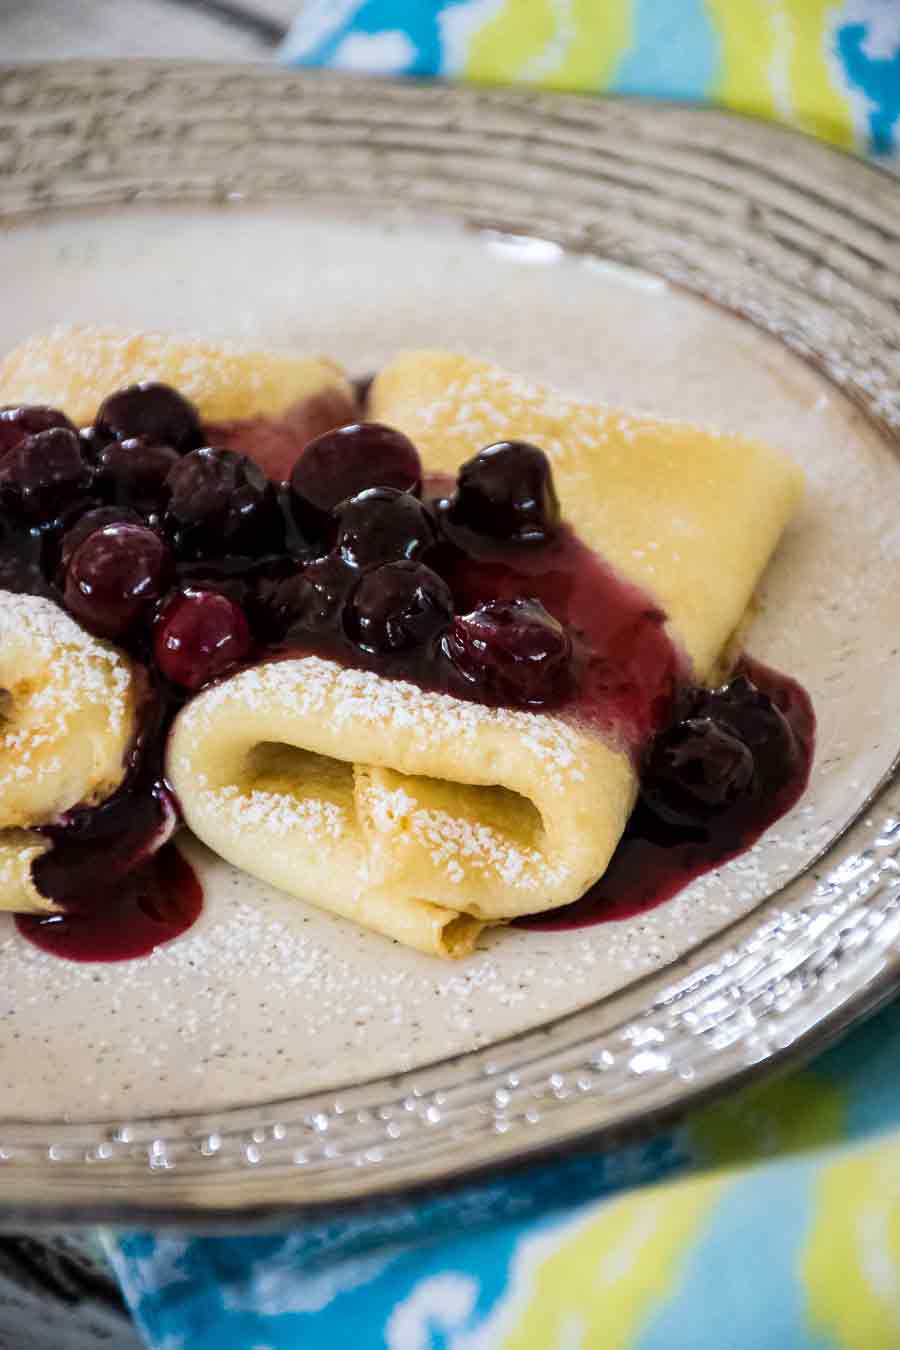 Cheese Blintzes with blueberry topping dusted with powdered sugar.